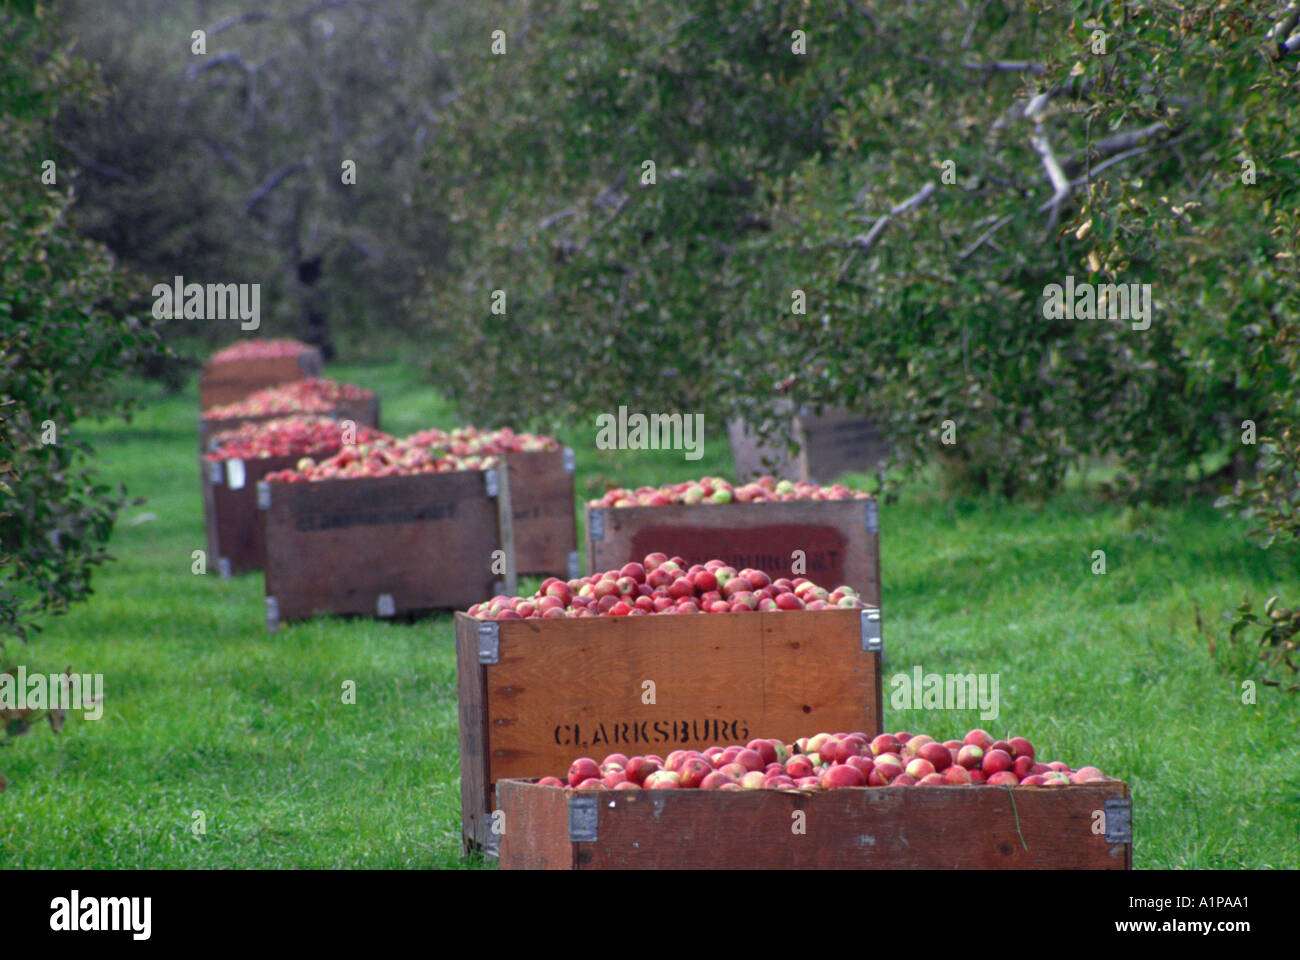 https://c8.alamy.com/comp/A1PAA1/picked-mcintosh-apples-in-bins-in-orchard-A1PAA1.jpg